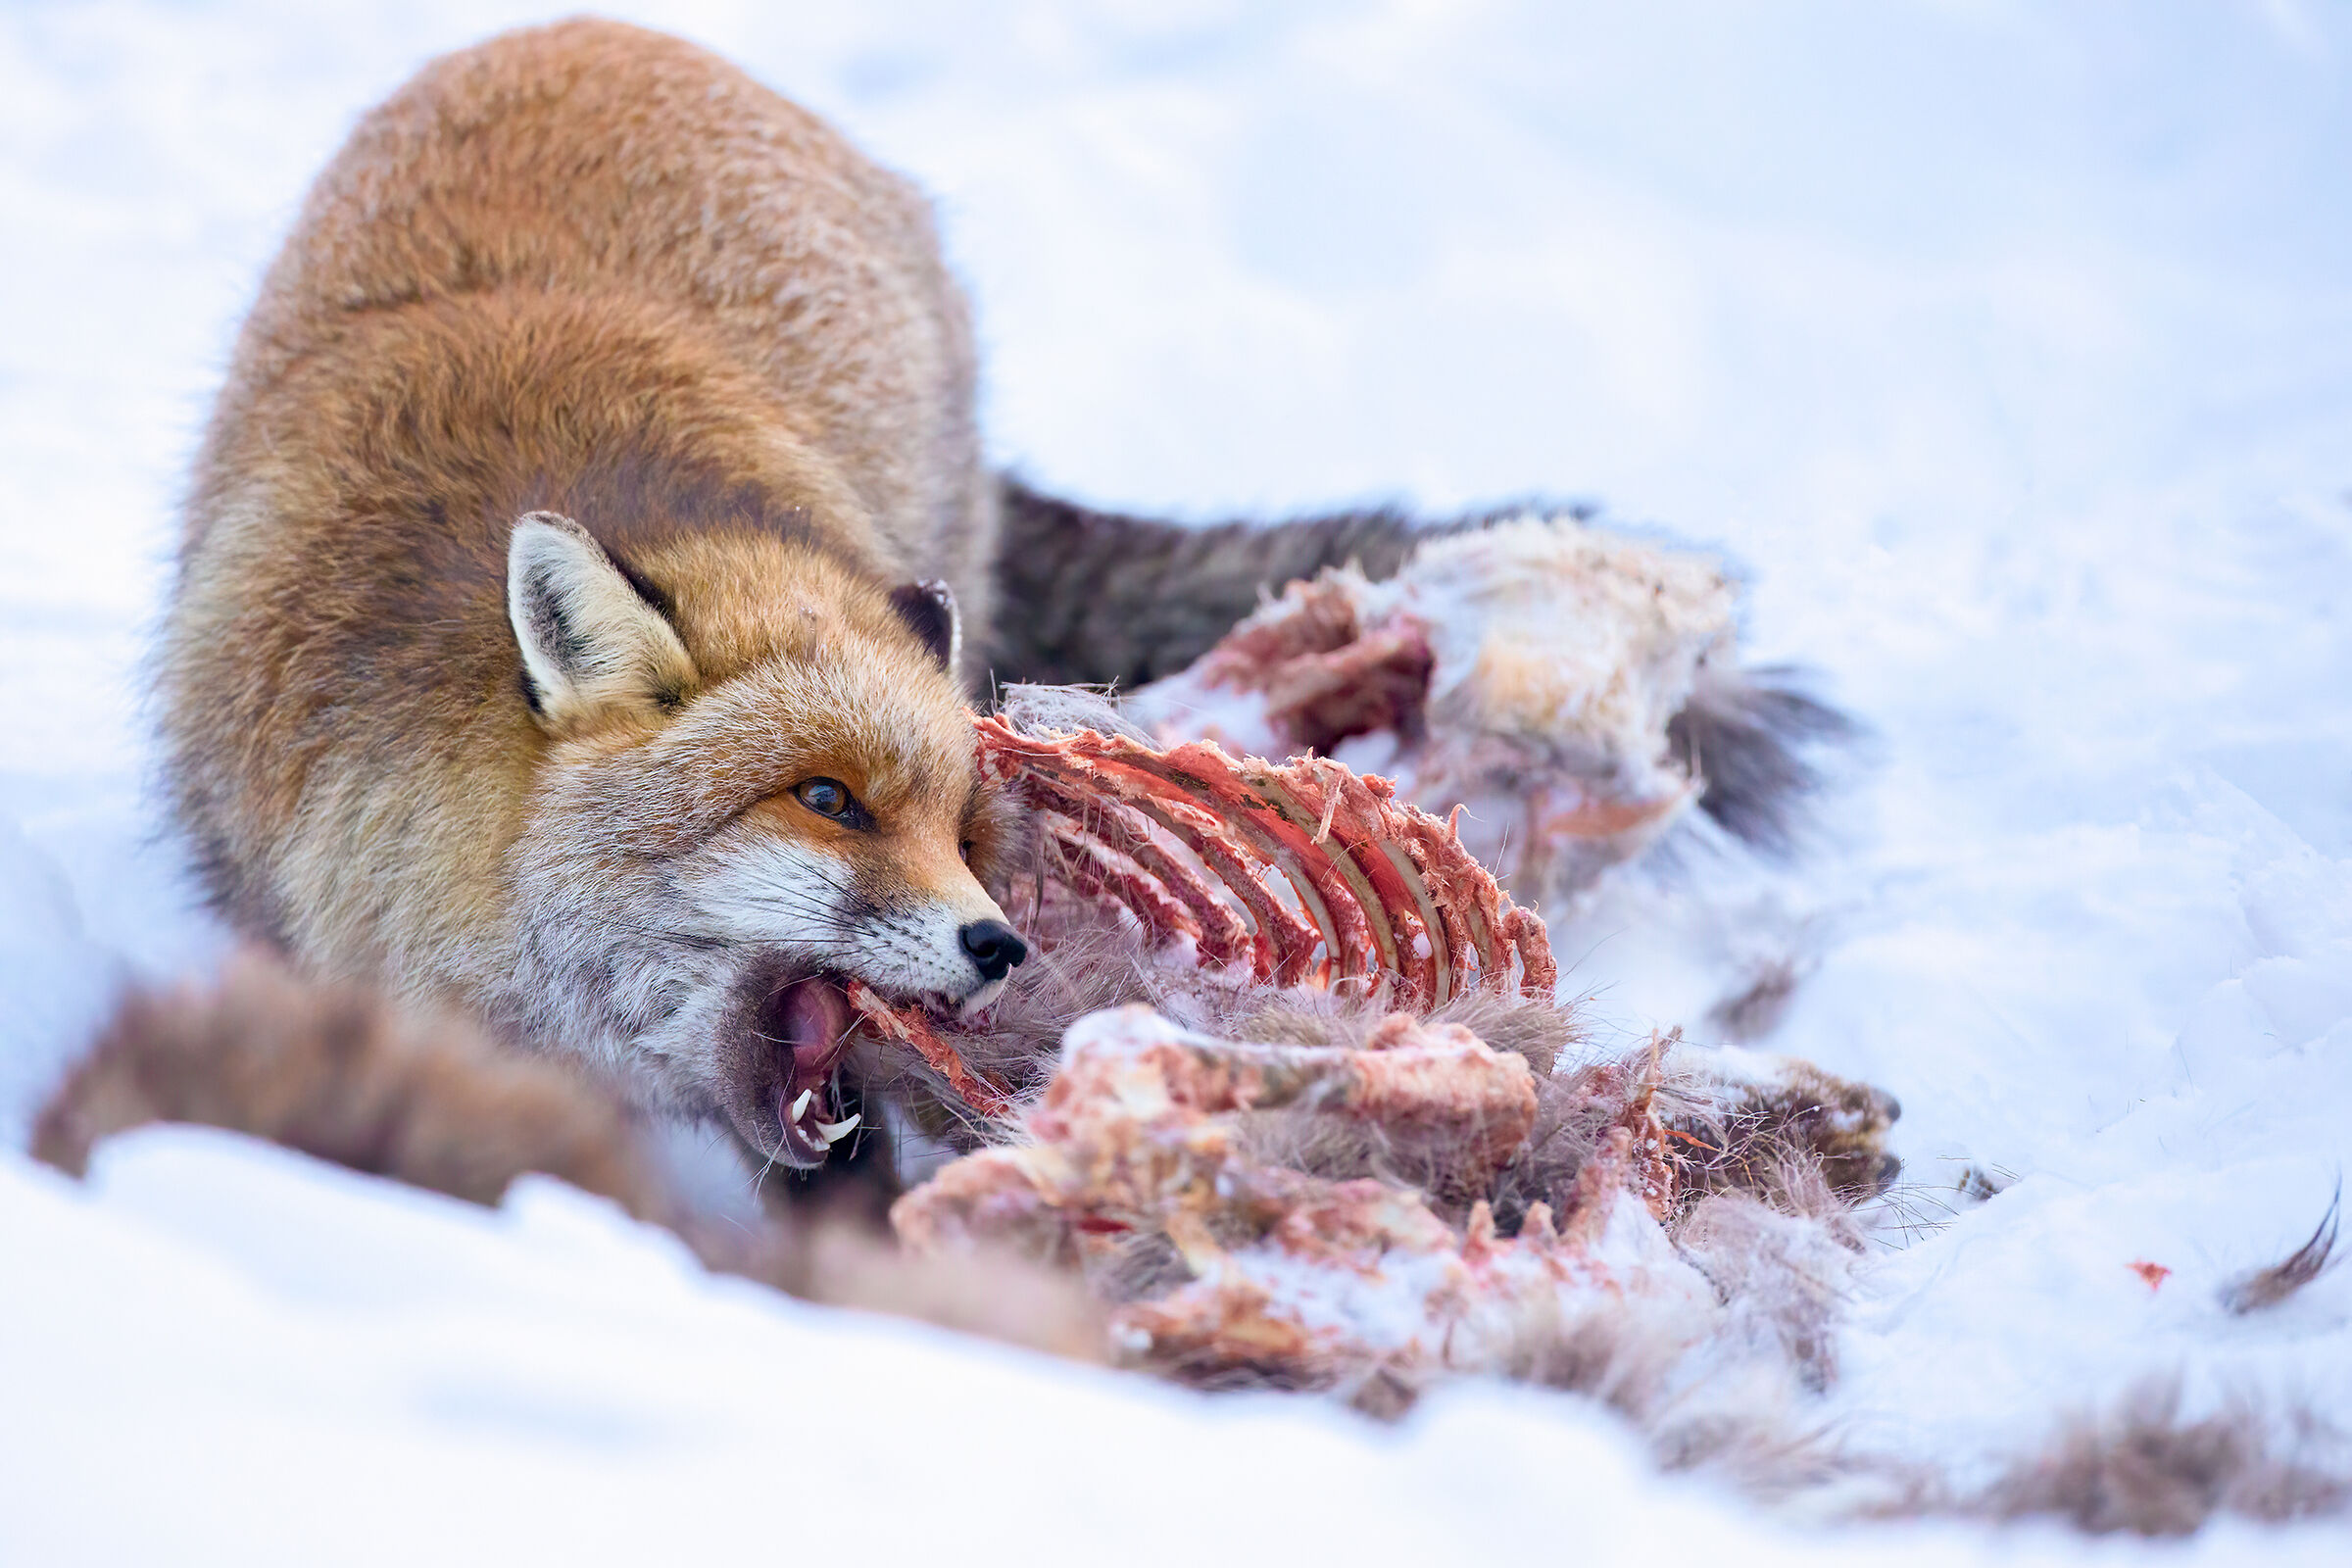 The Fox and the Carcass...